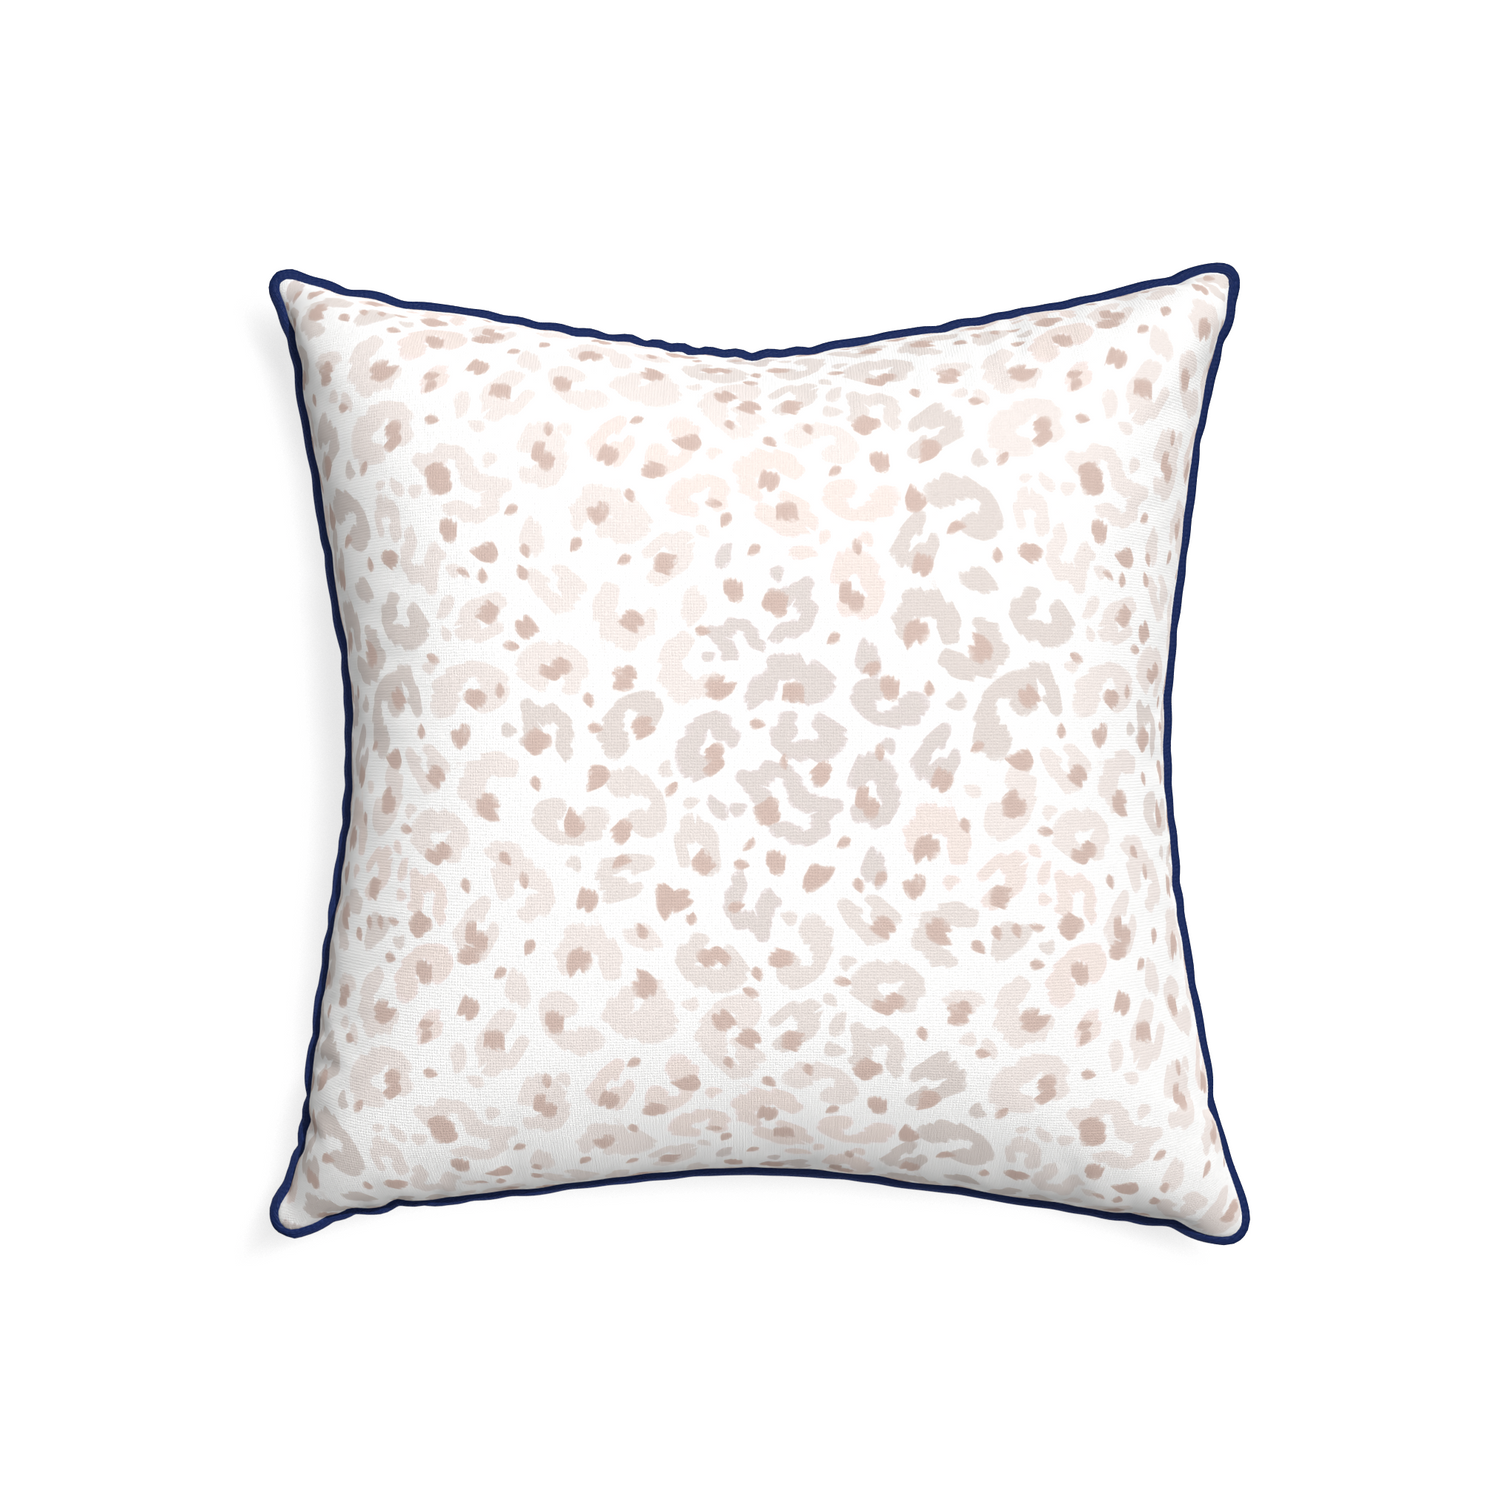 22-square rosie custom beige animal printpillow with midnight piping on white background